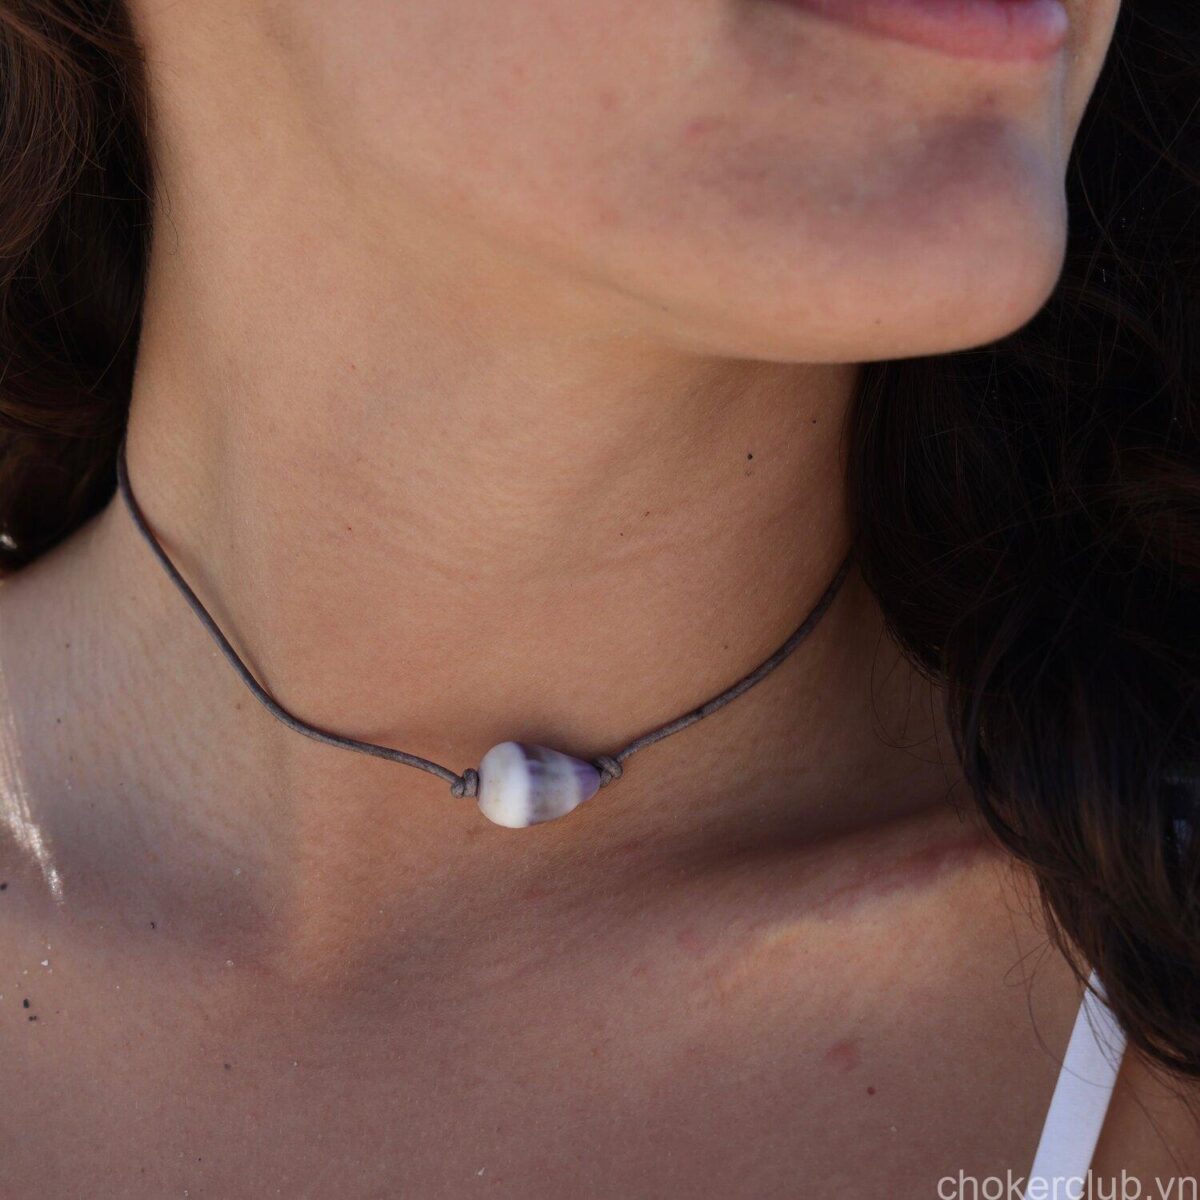 How To Make Your Own Shell Choker Necklace At Home